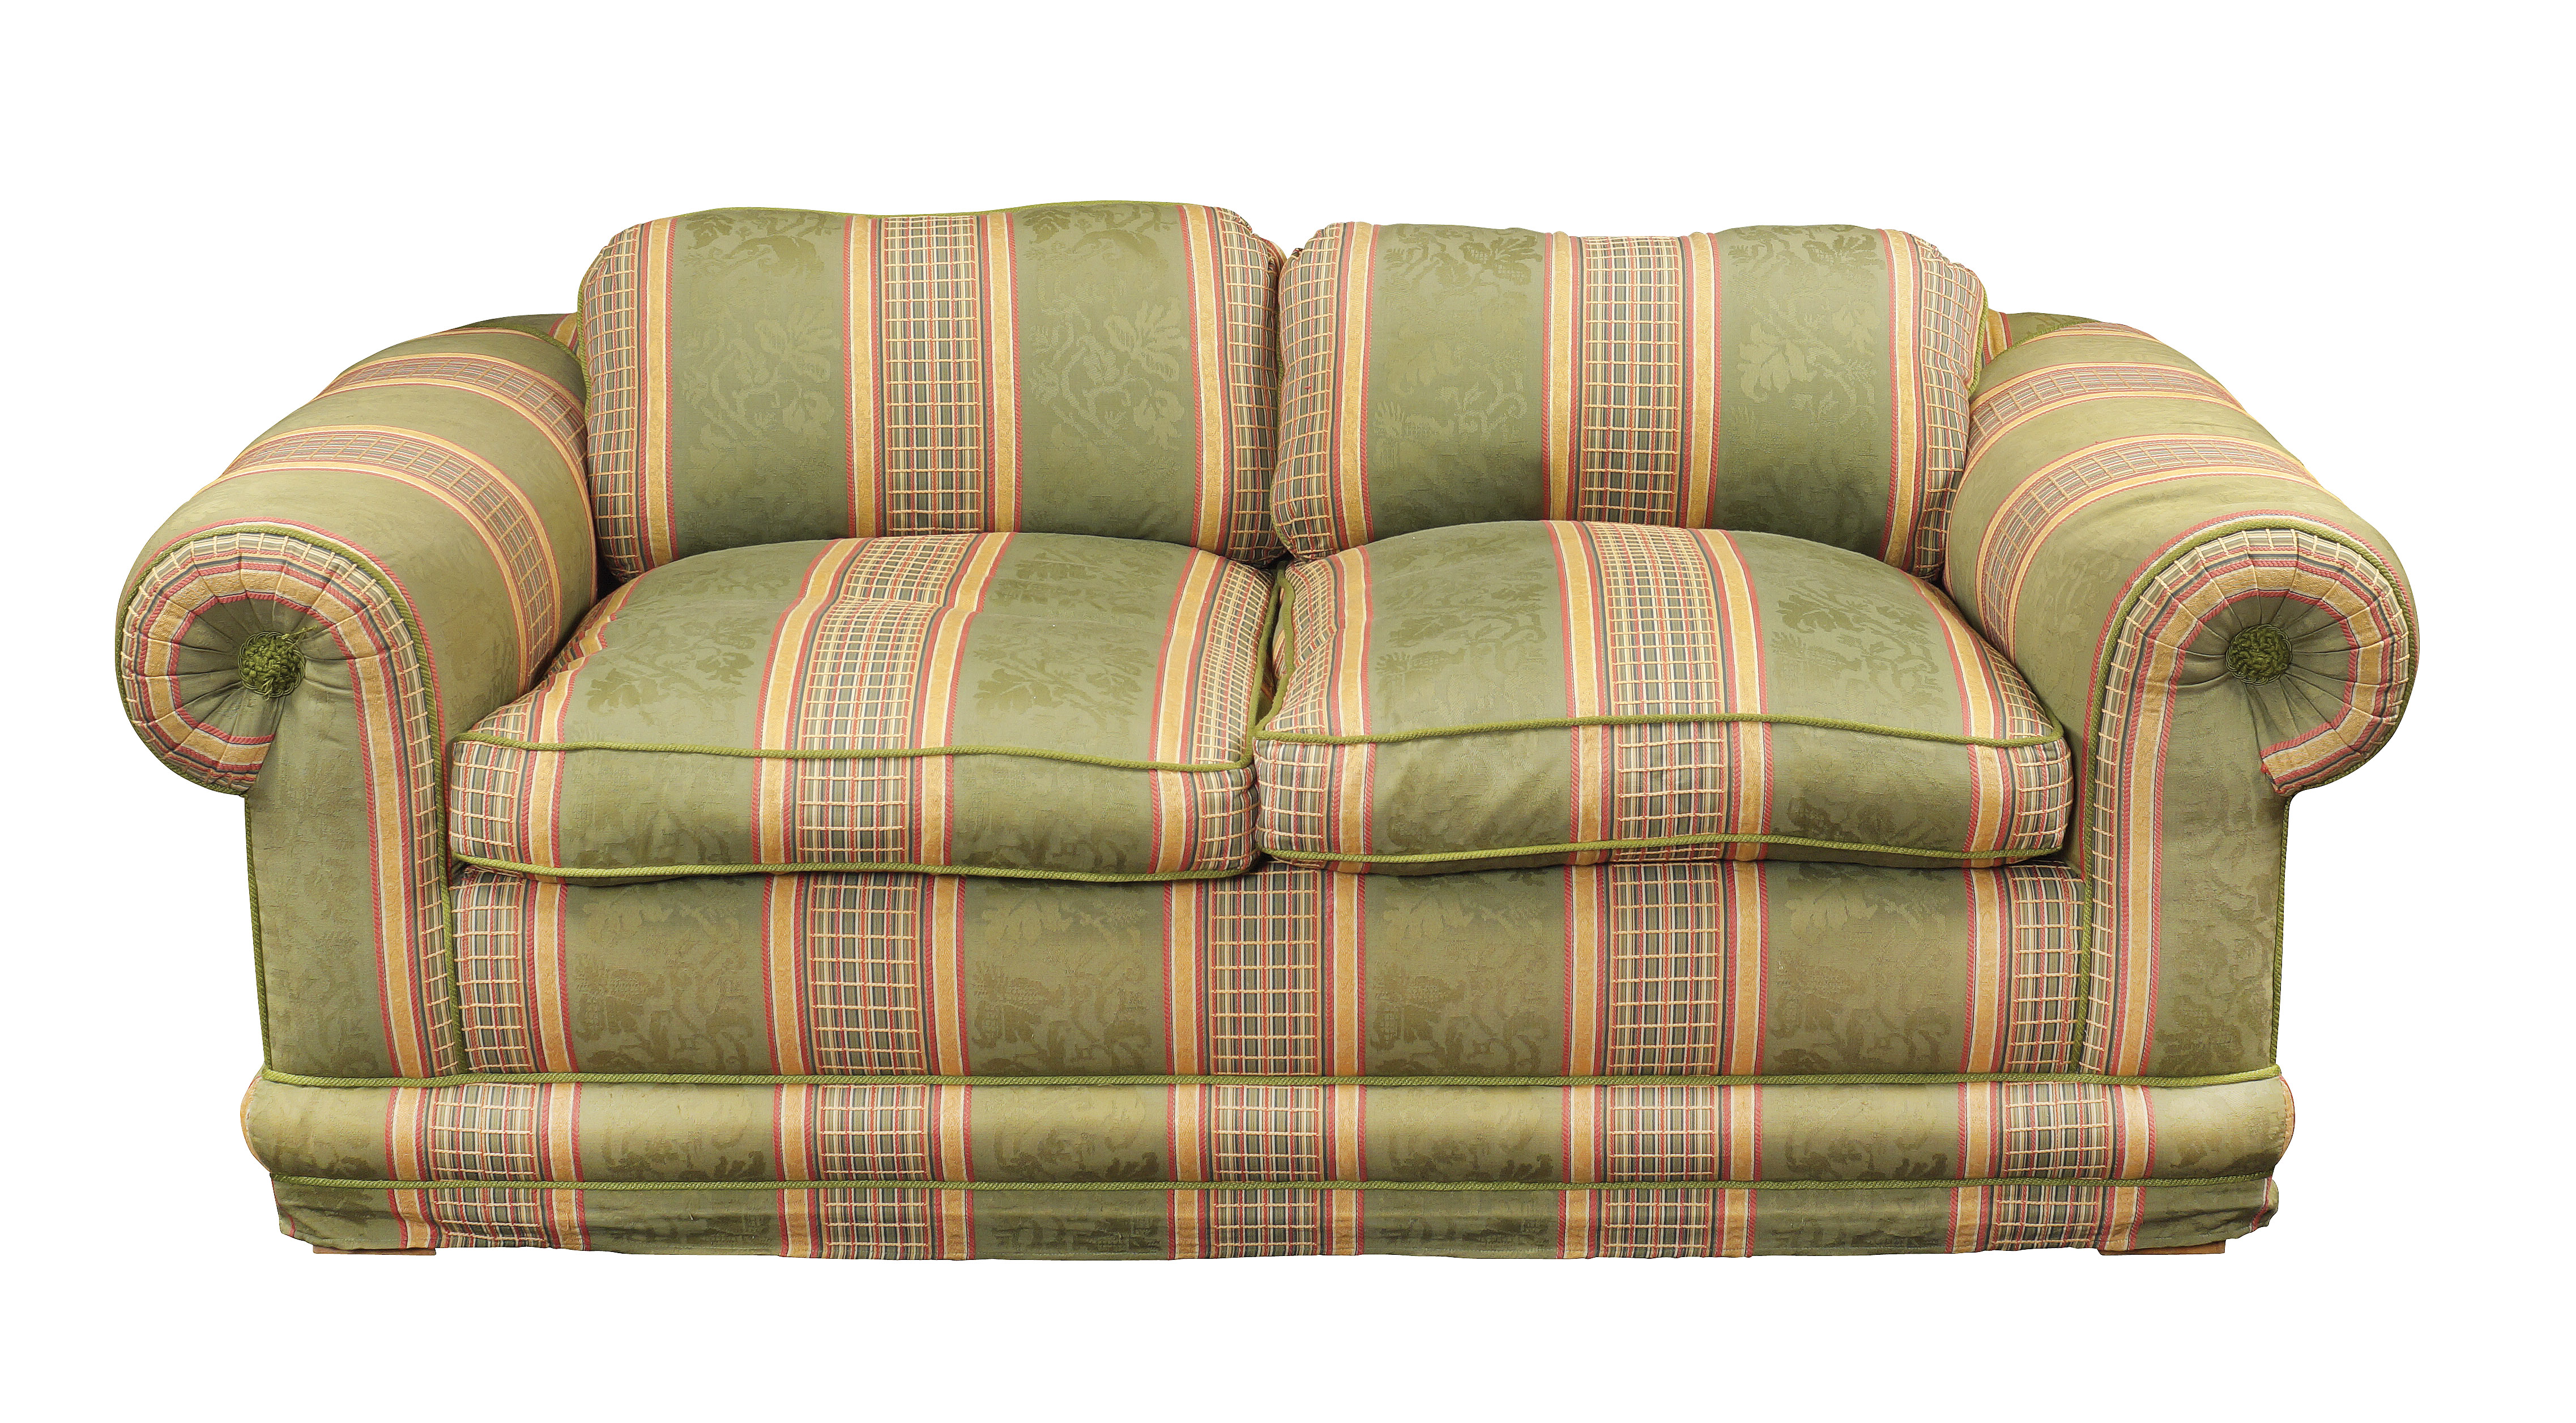 A two seater sofa 20th century 65x183x103 cm.